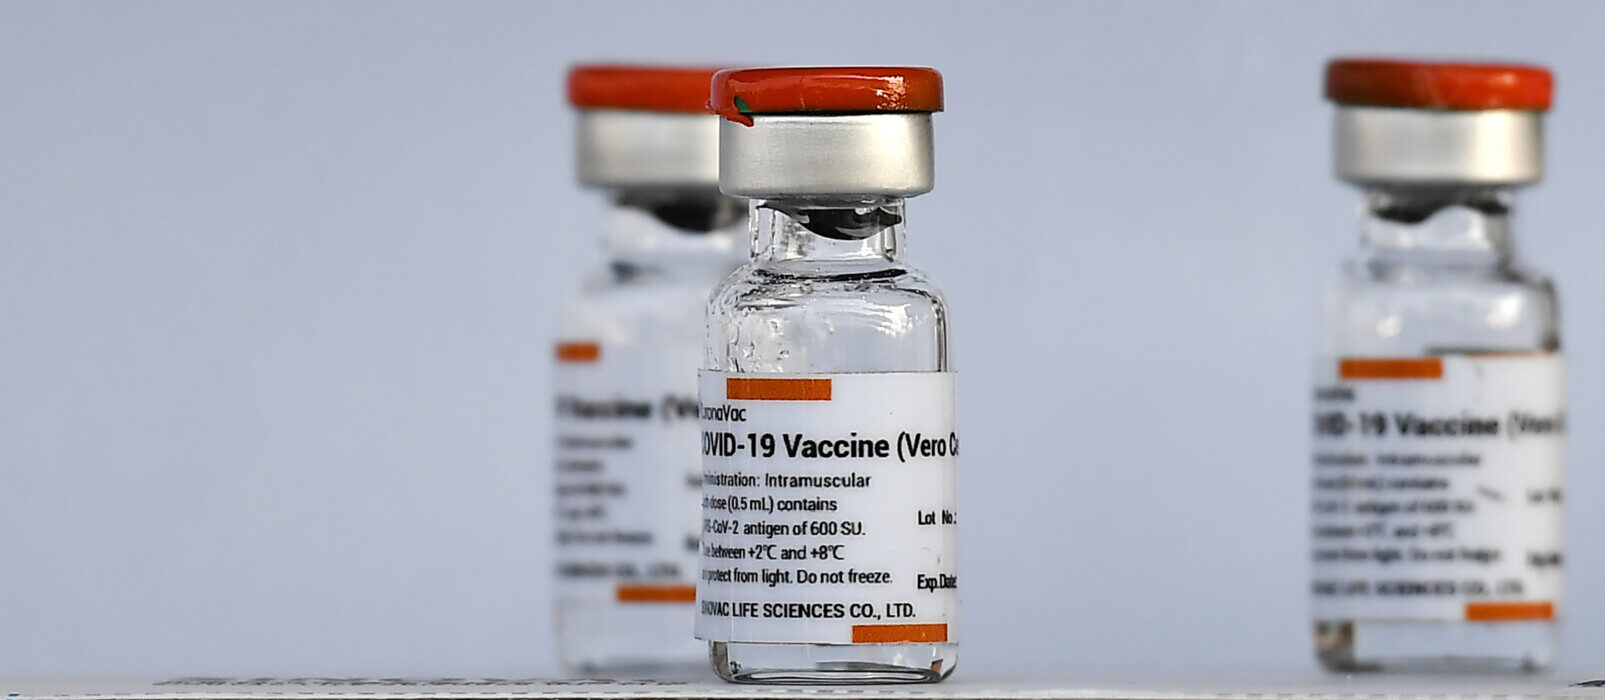 3 Deaths in 9 Days After Hongkongers Get China’s Sinovac Vaccine